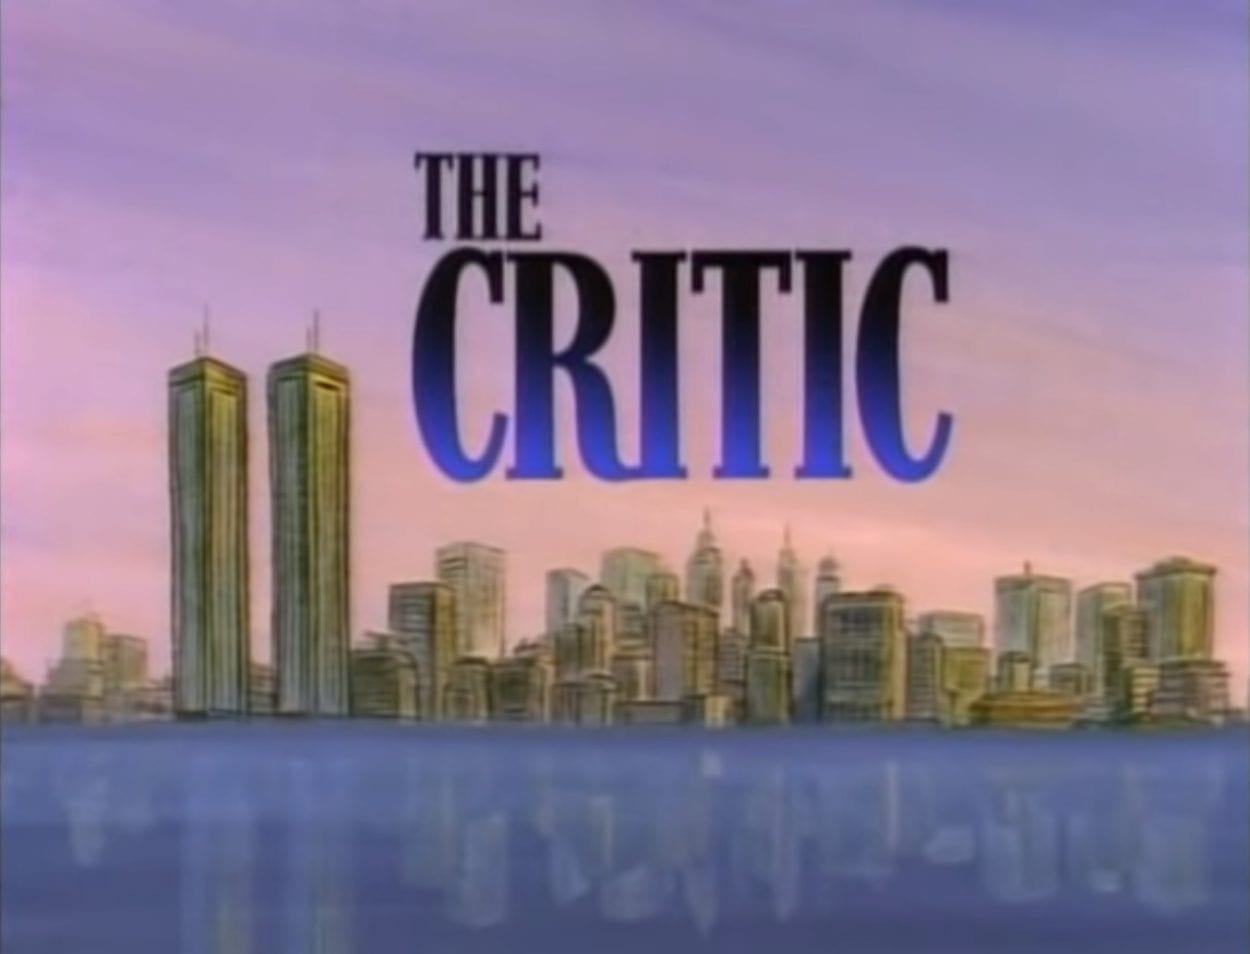 The opening card for The Critic